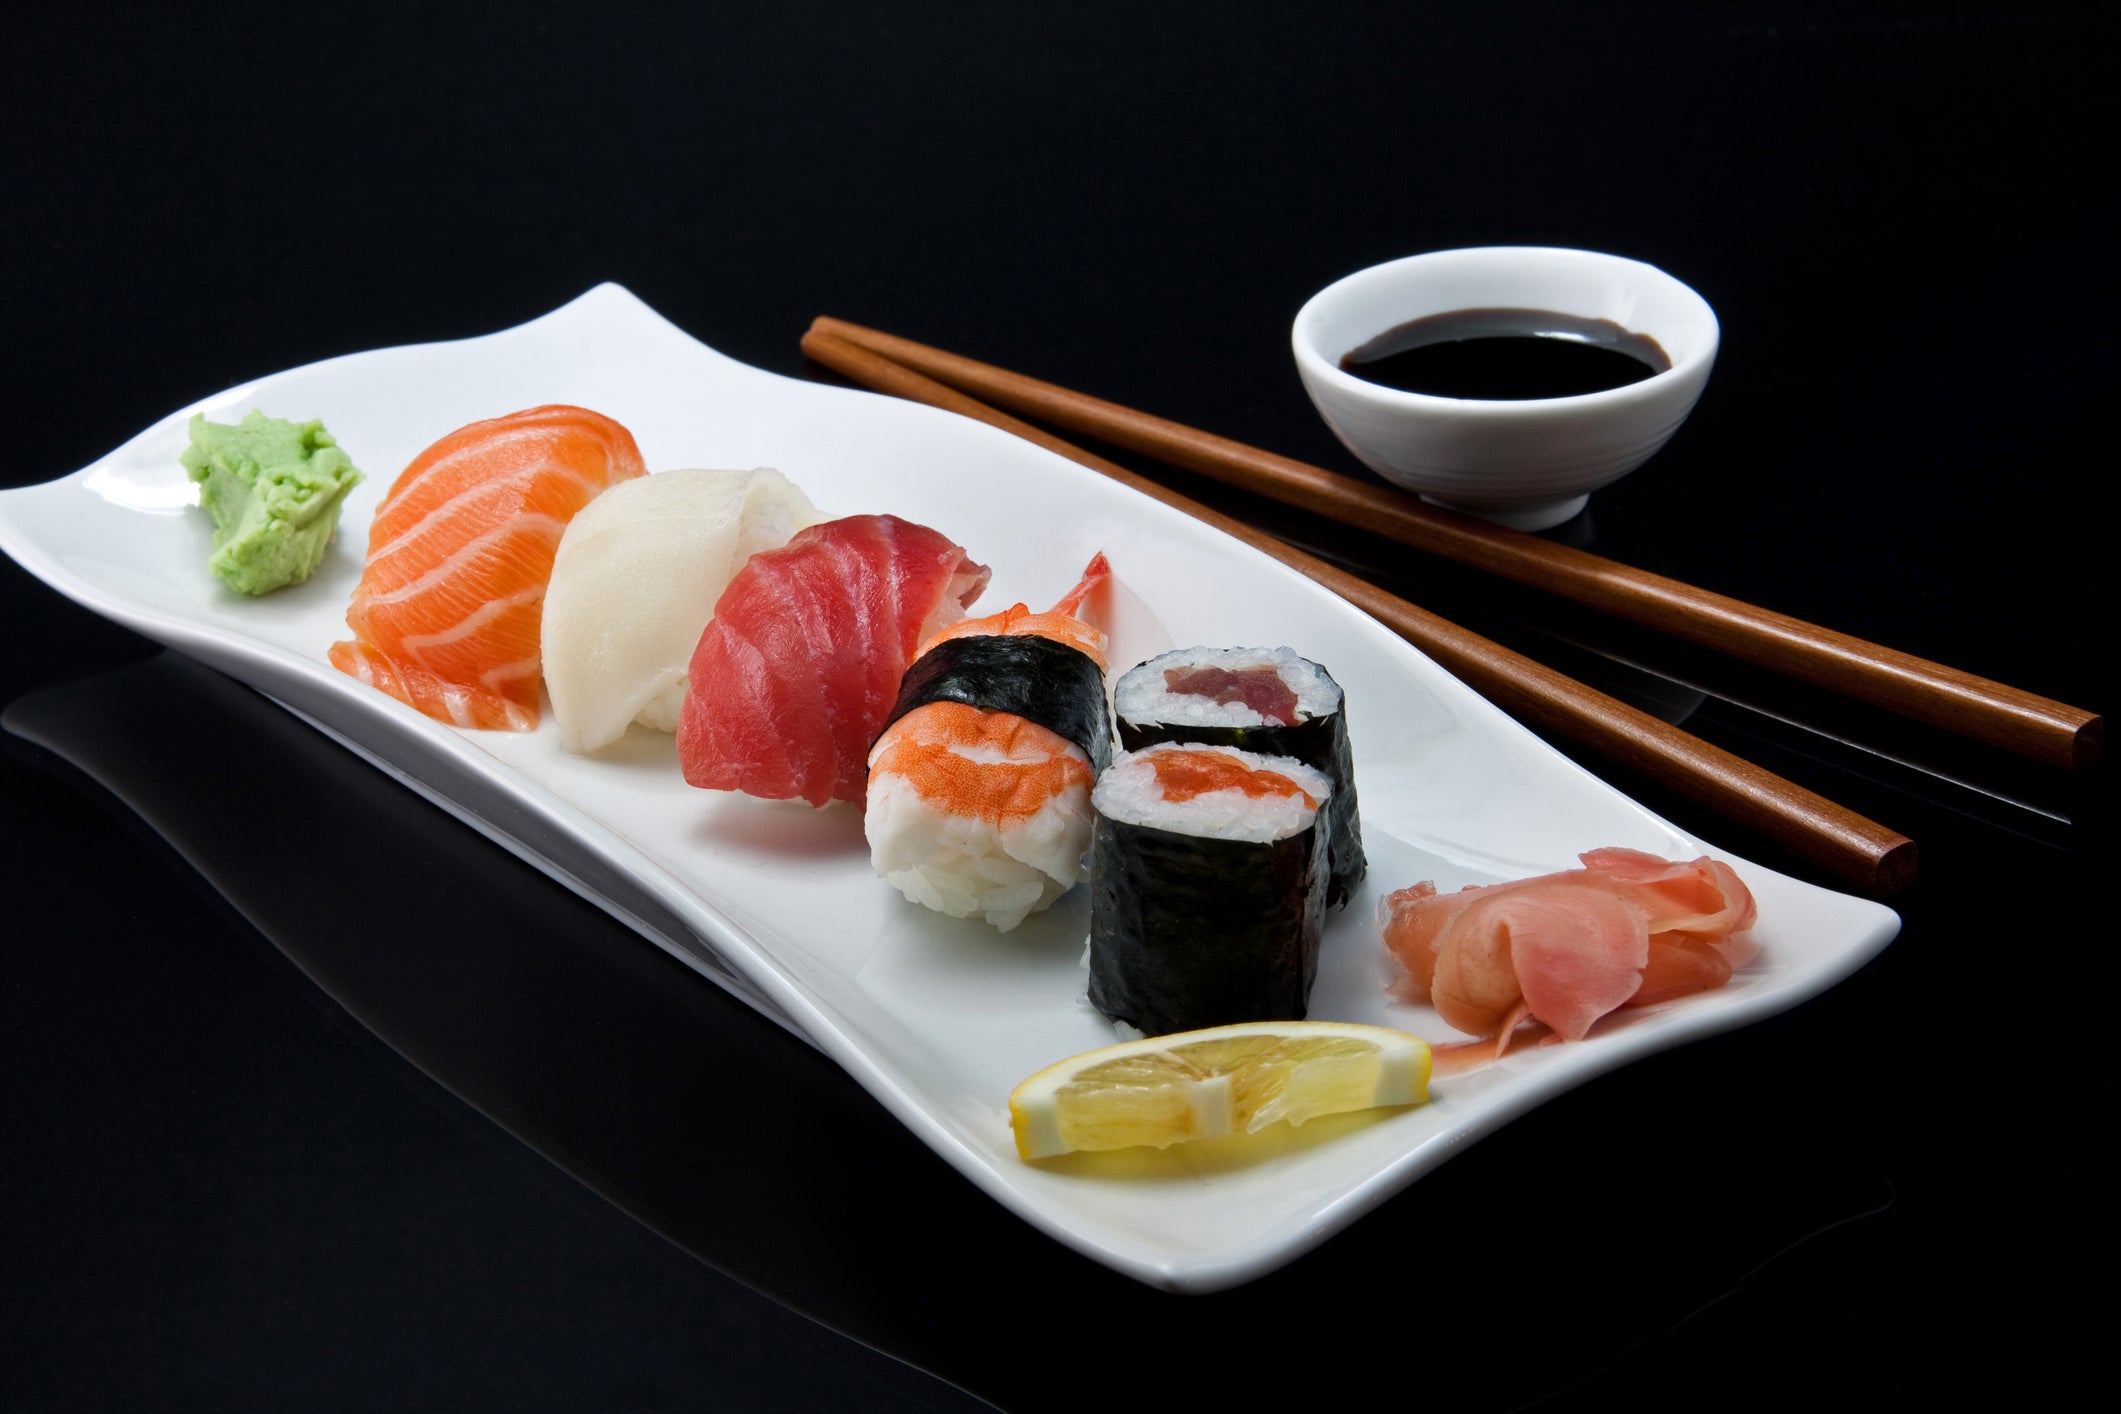 What is the correct order of eating sushi?